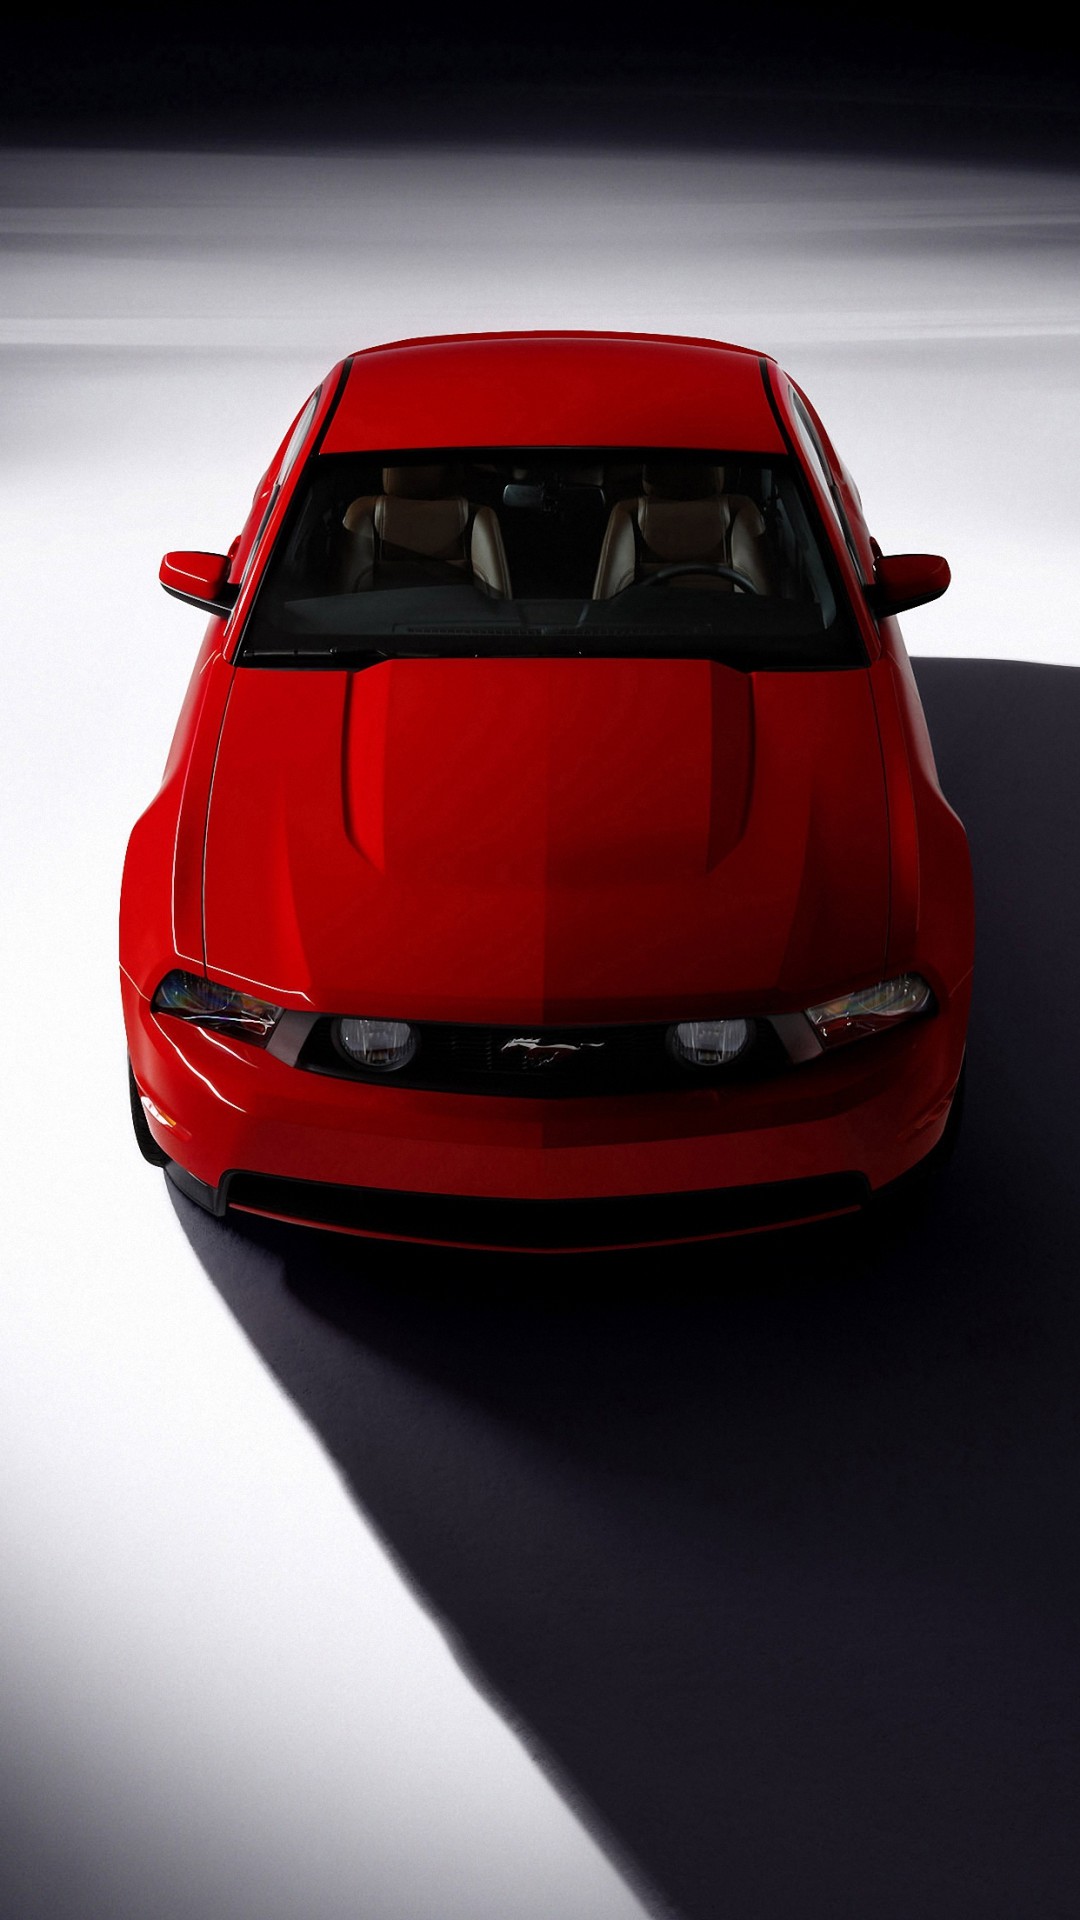 Wallpaper Ford Mustang Iphone